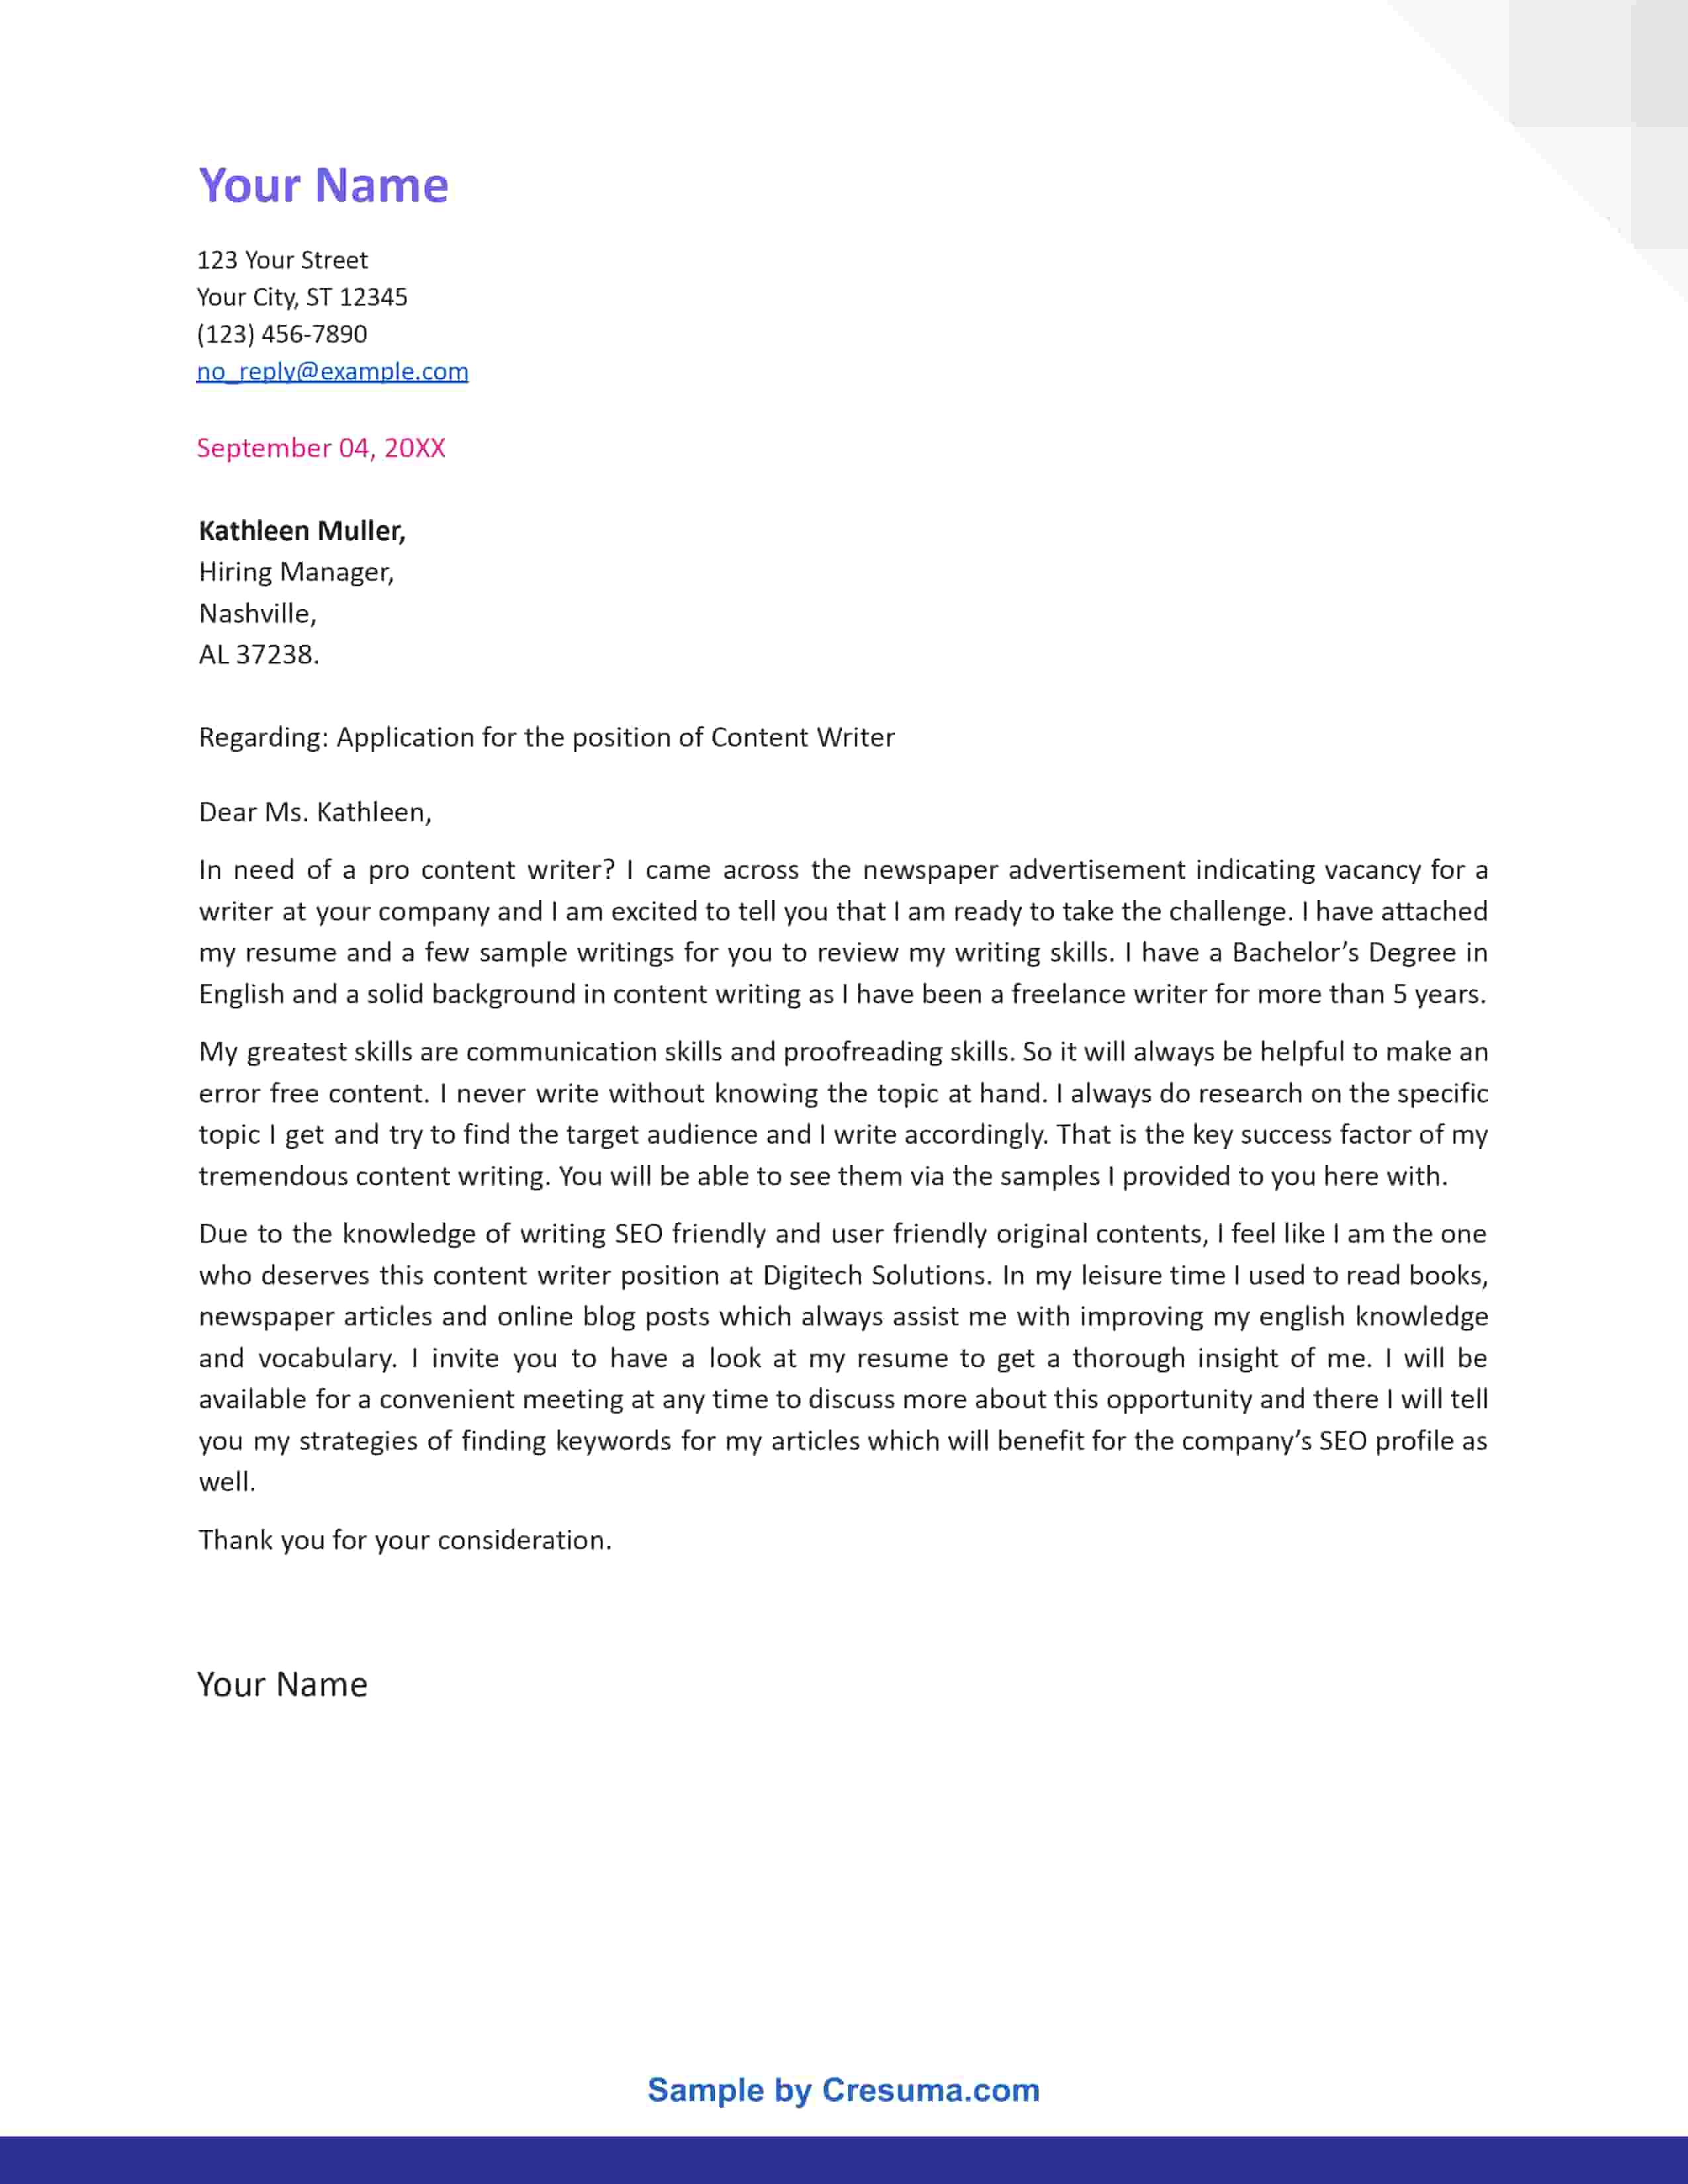 Content Writer cover letter template 3